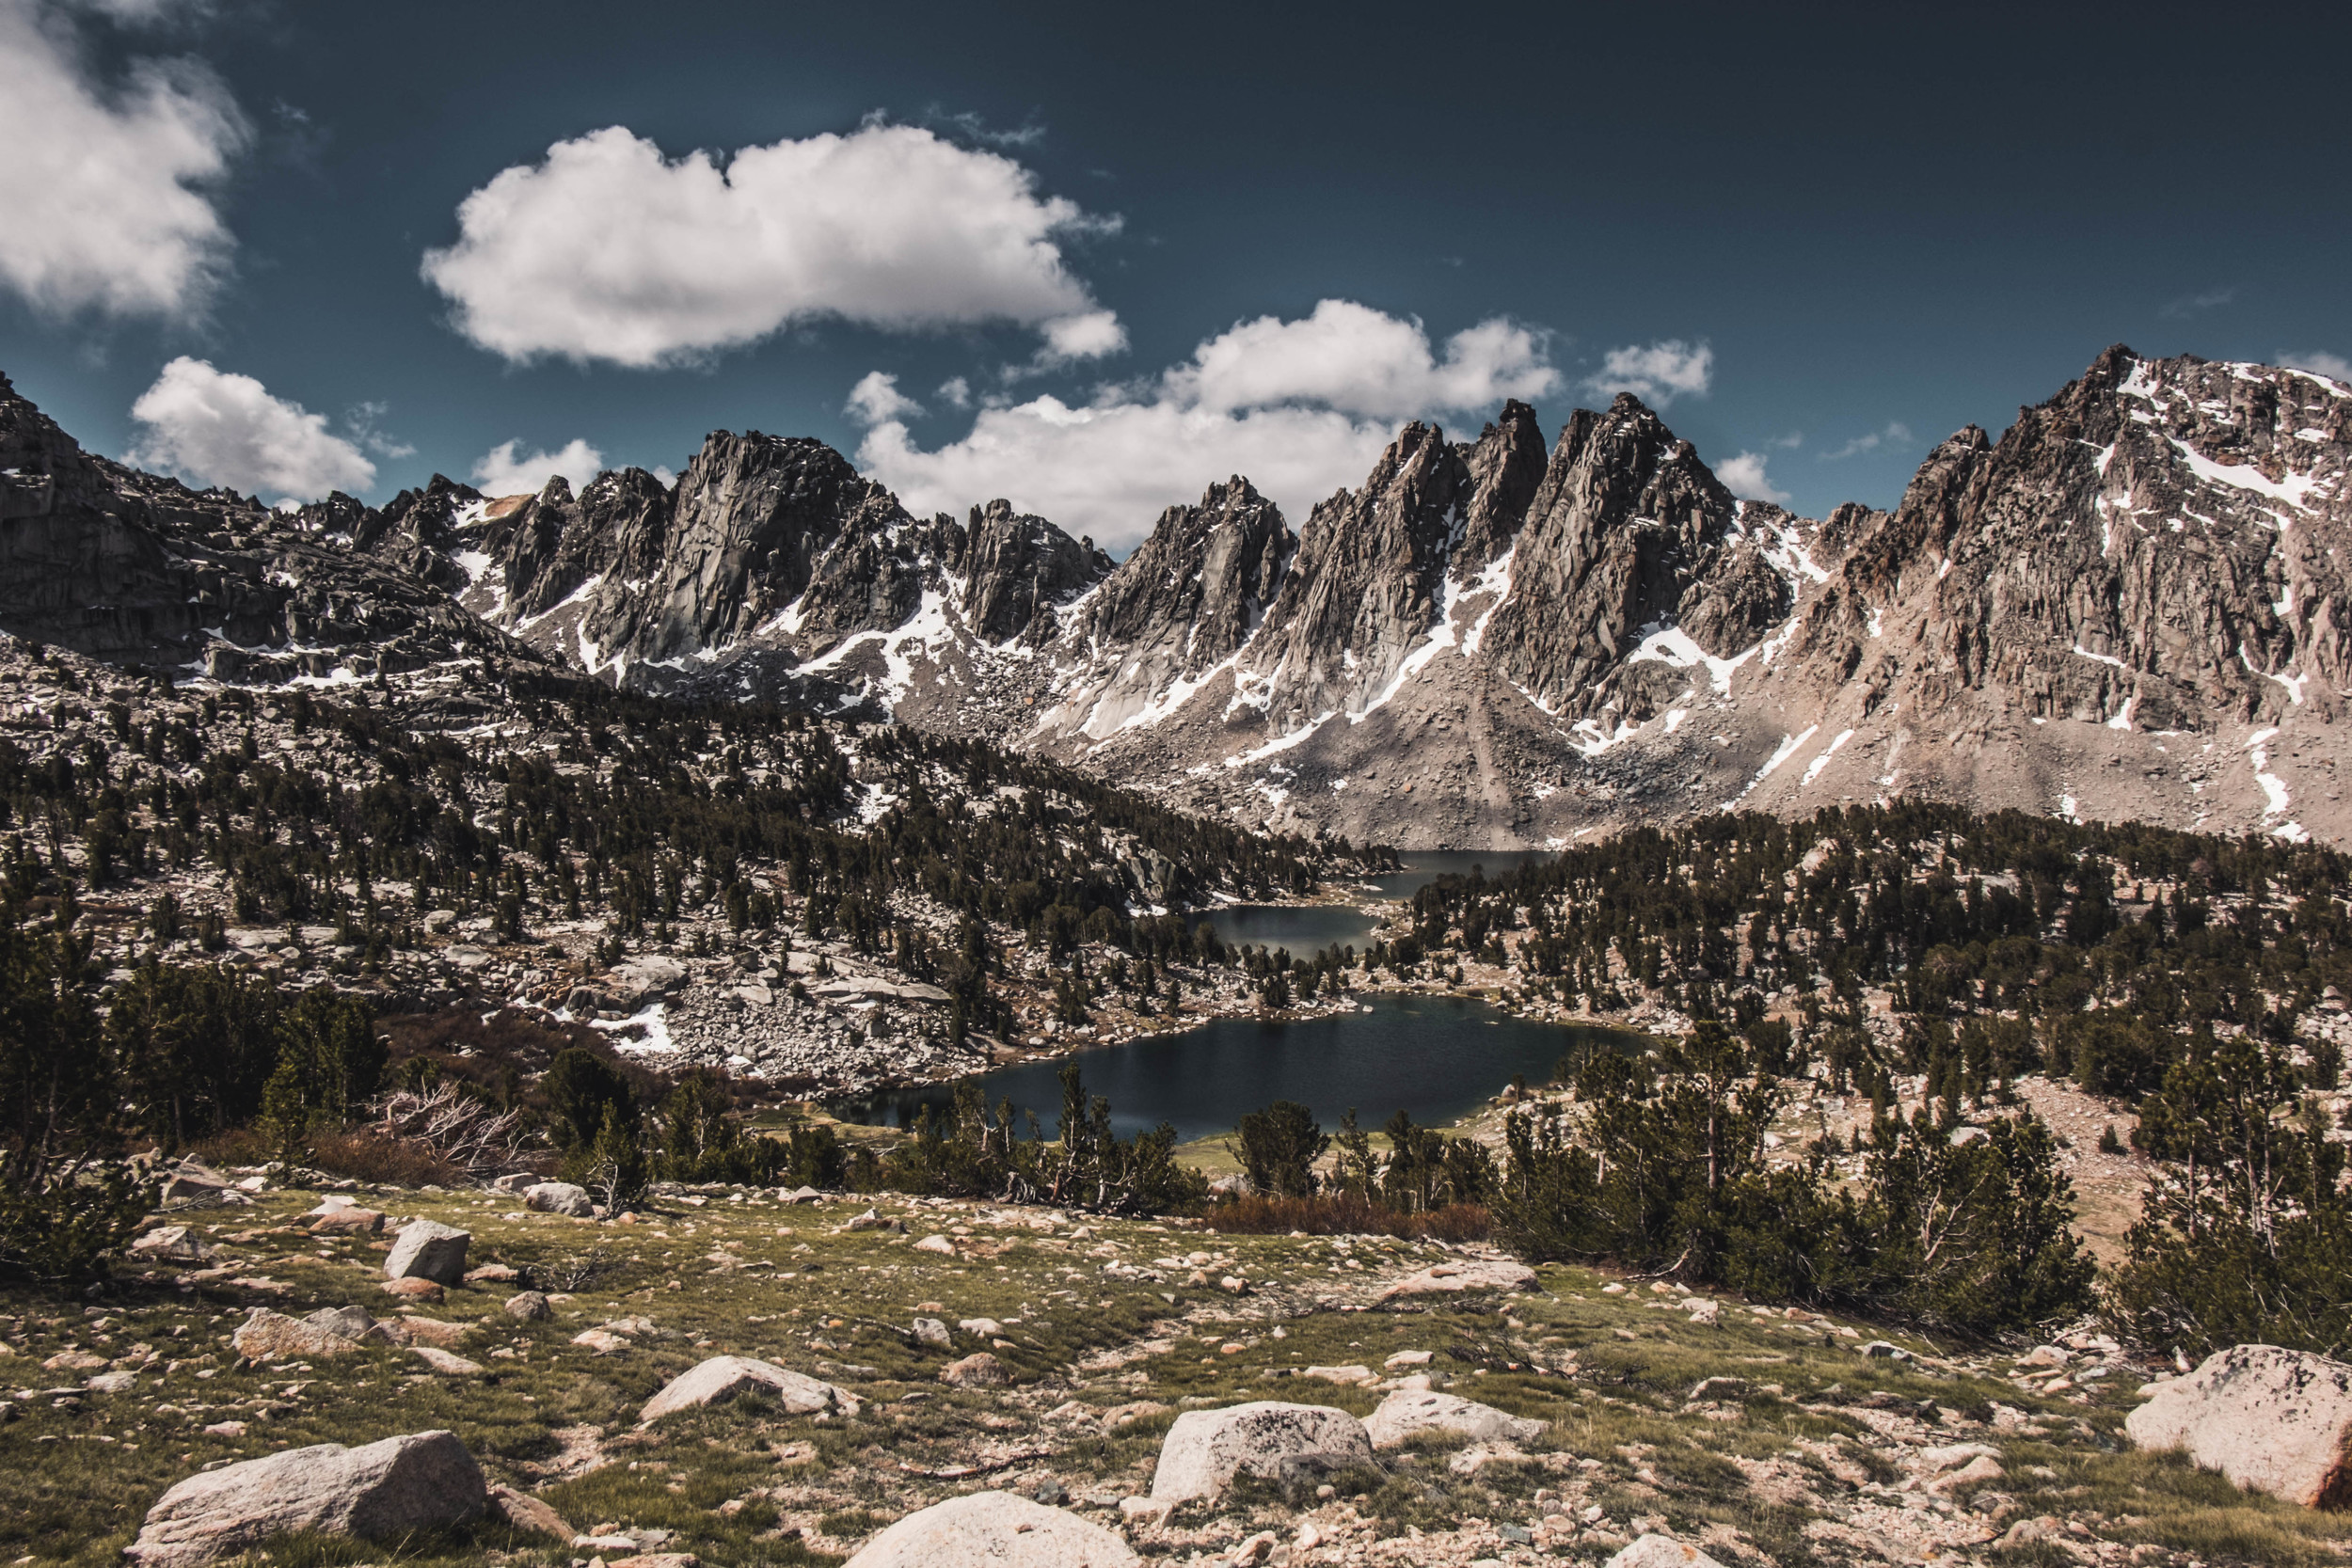   Kearsarge Lake and Pinnacles  |&nbsp; grateful for a clear exit day  